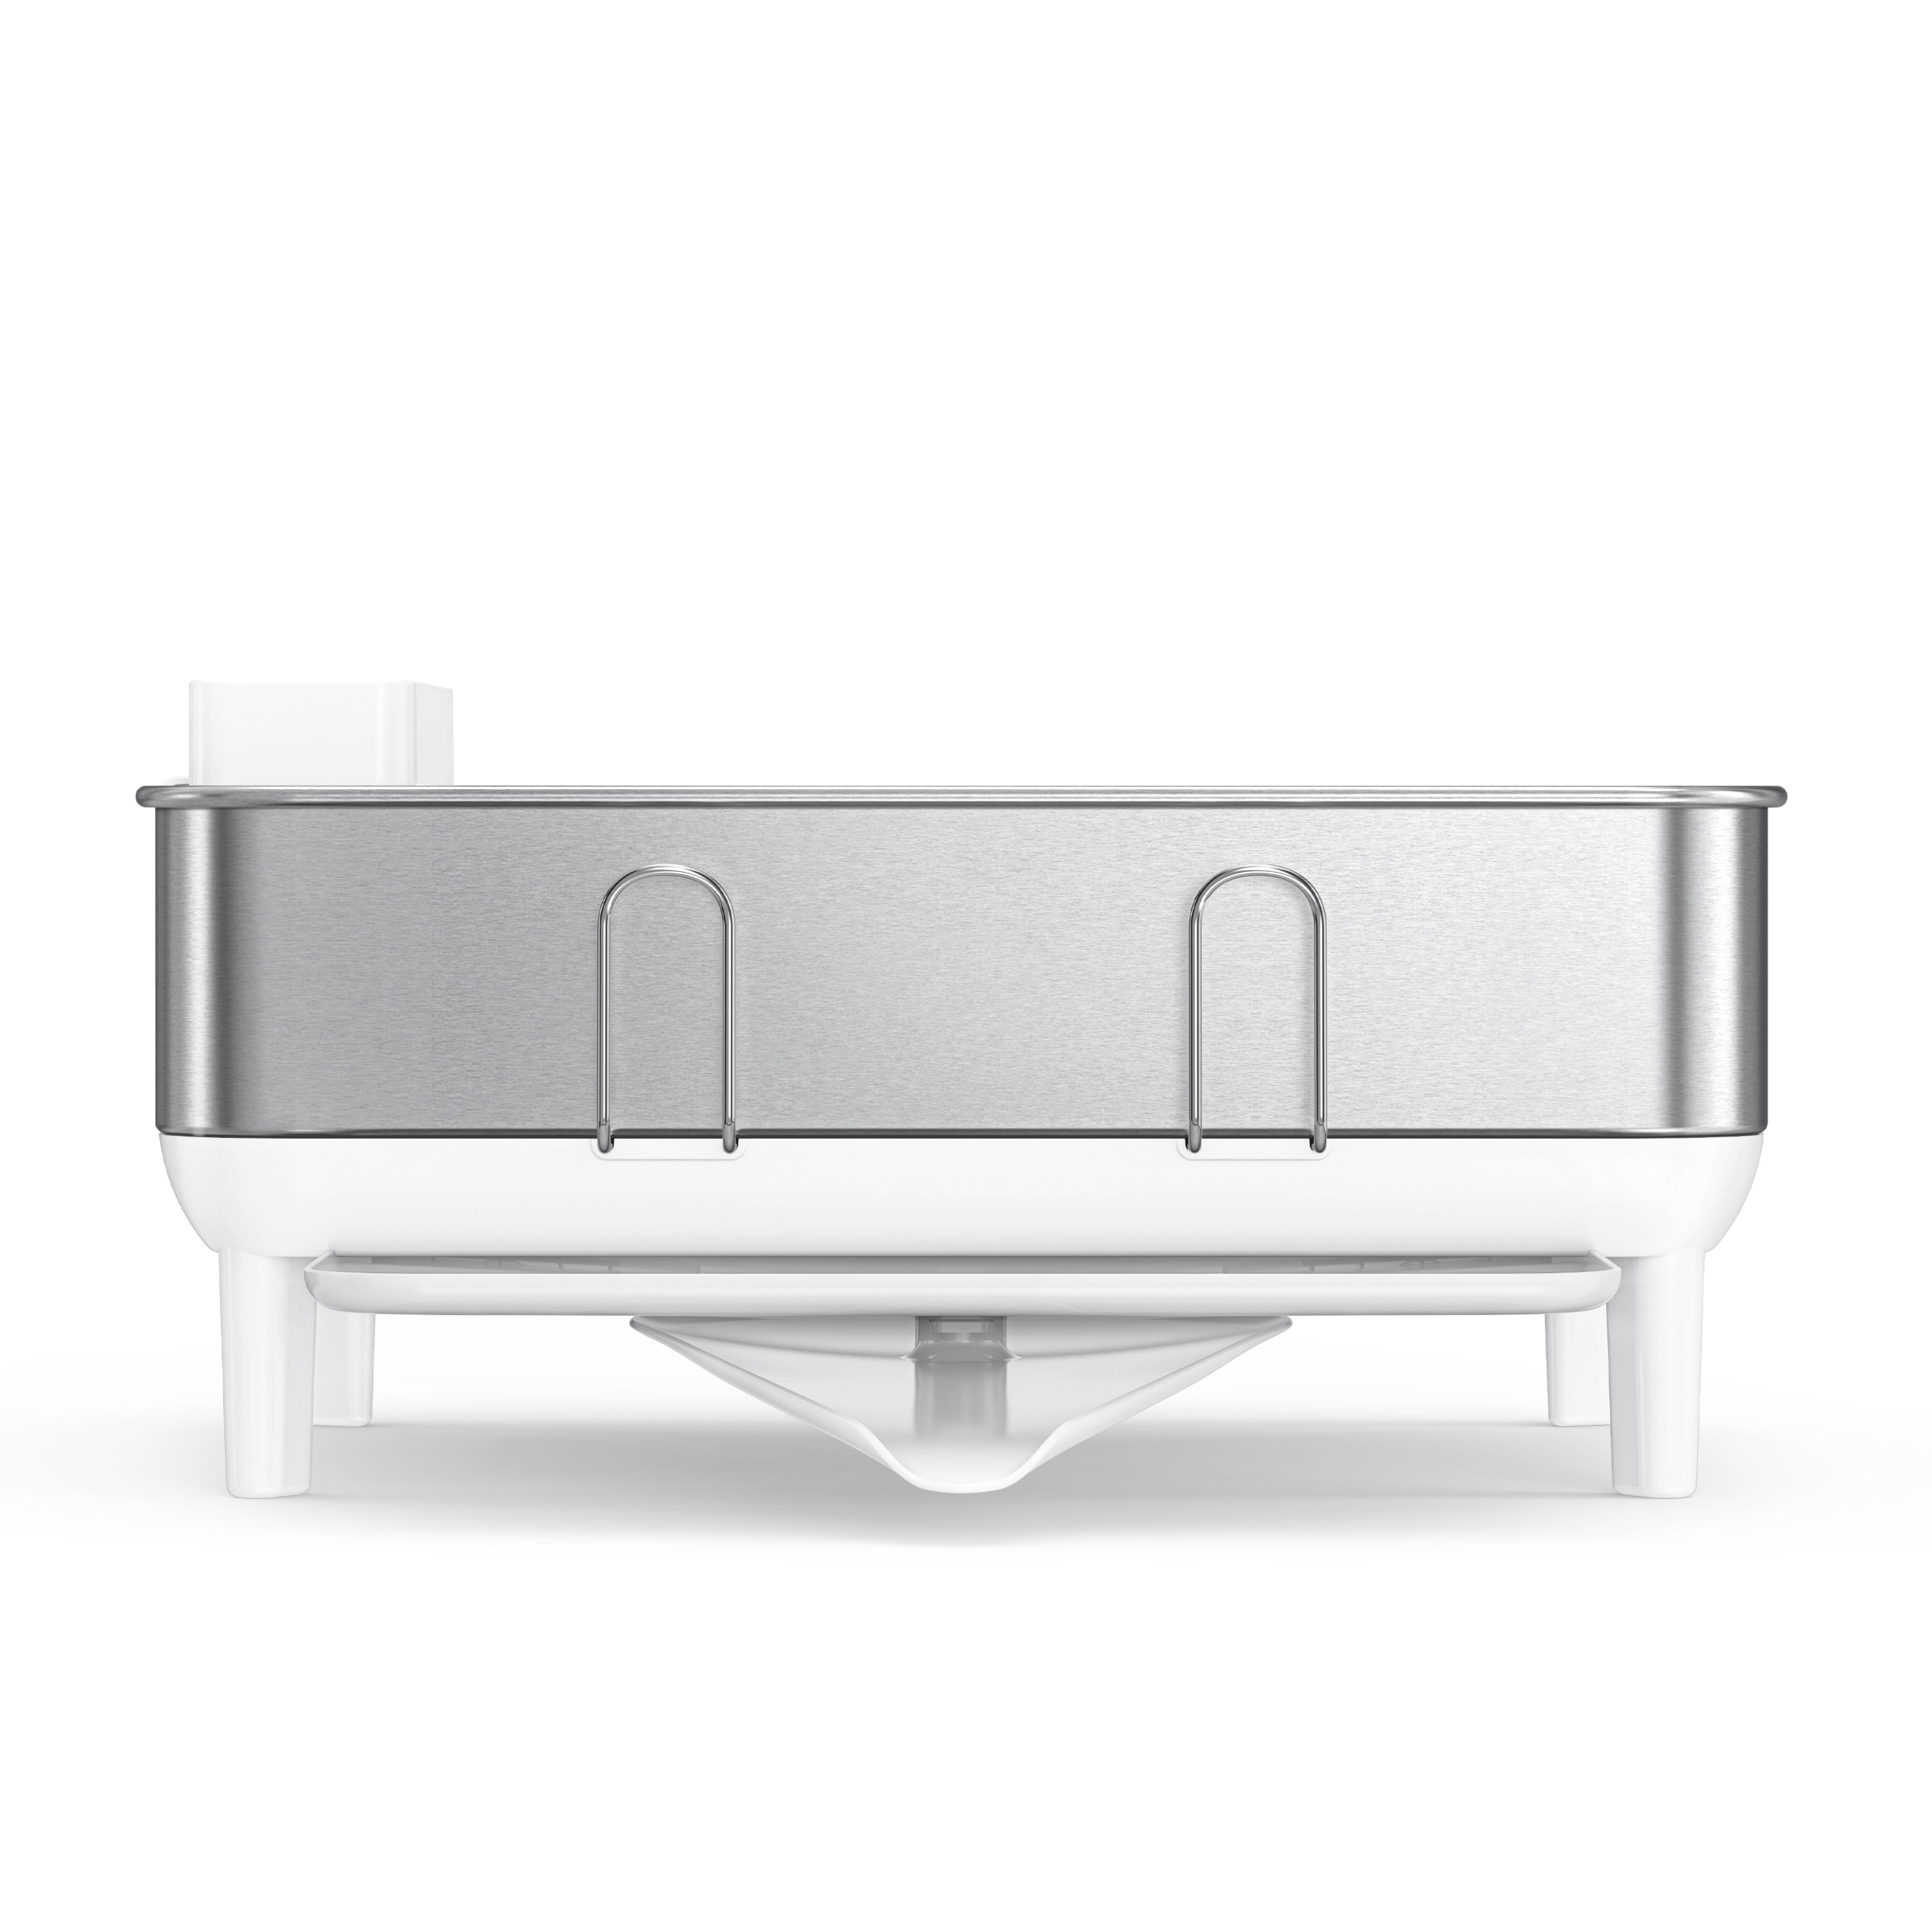 simplehuman 12.7-in W x 19.5-in L x 8.2-in H Stainless Steel Dish Rack at